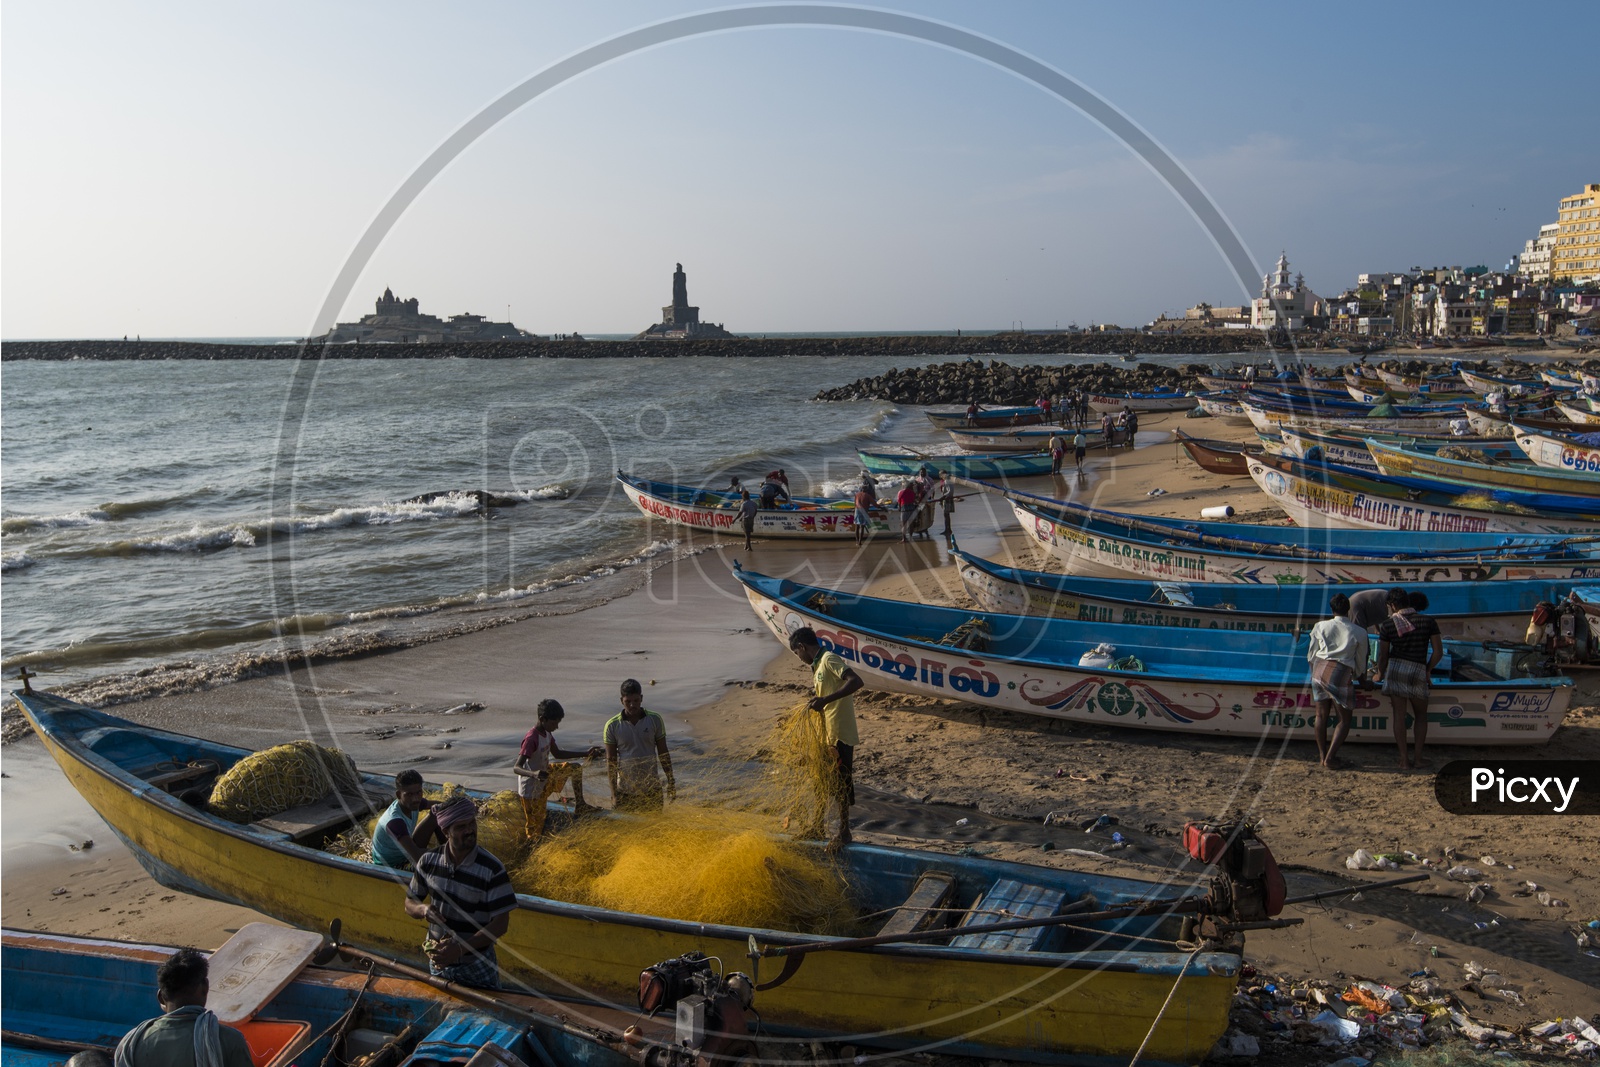 Fishermen setting up the fishing net on a boat at a Beach